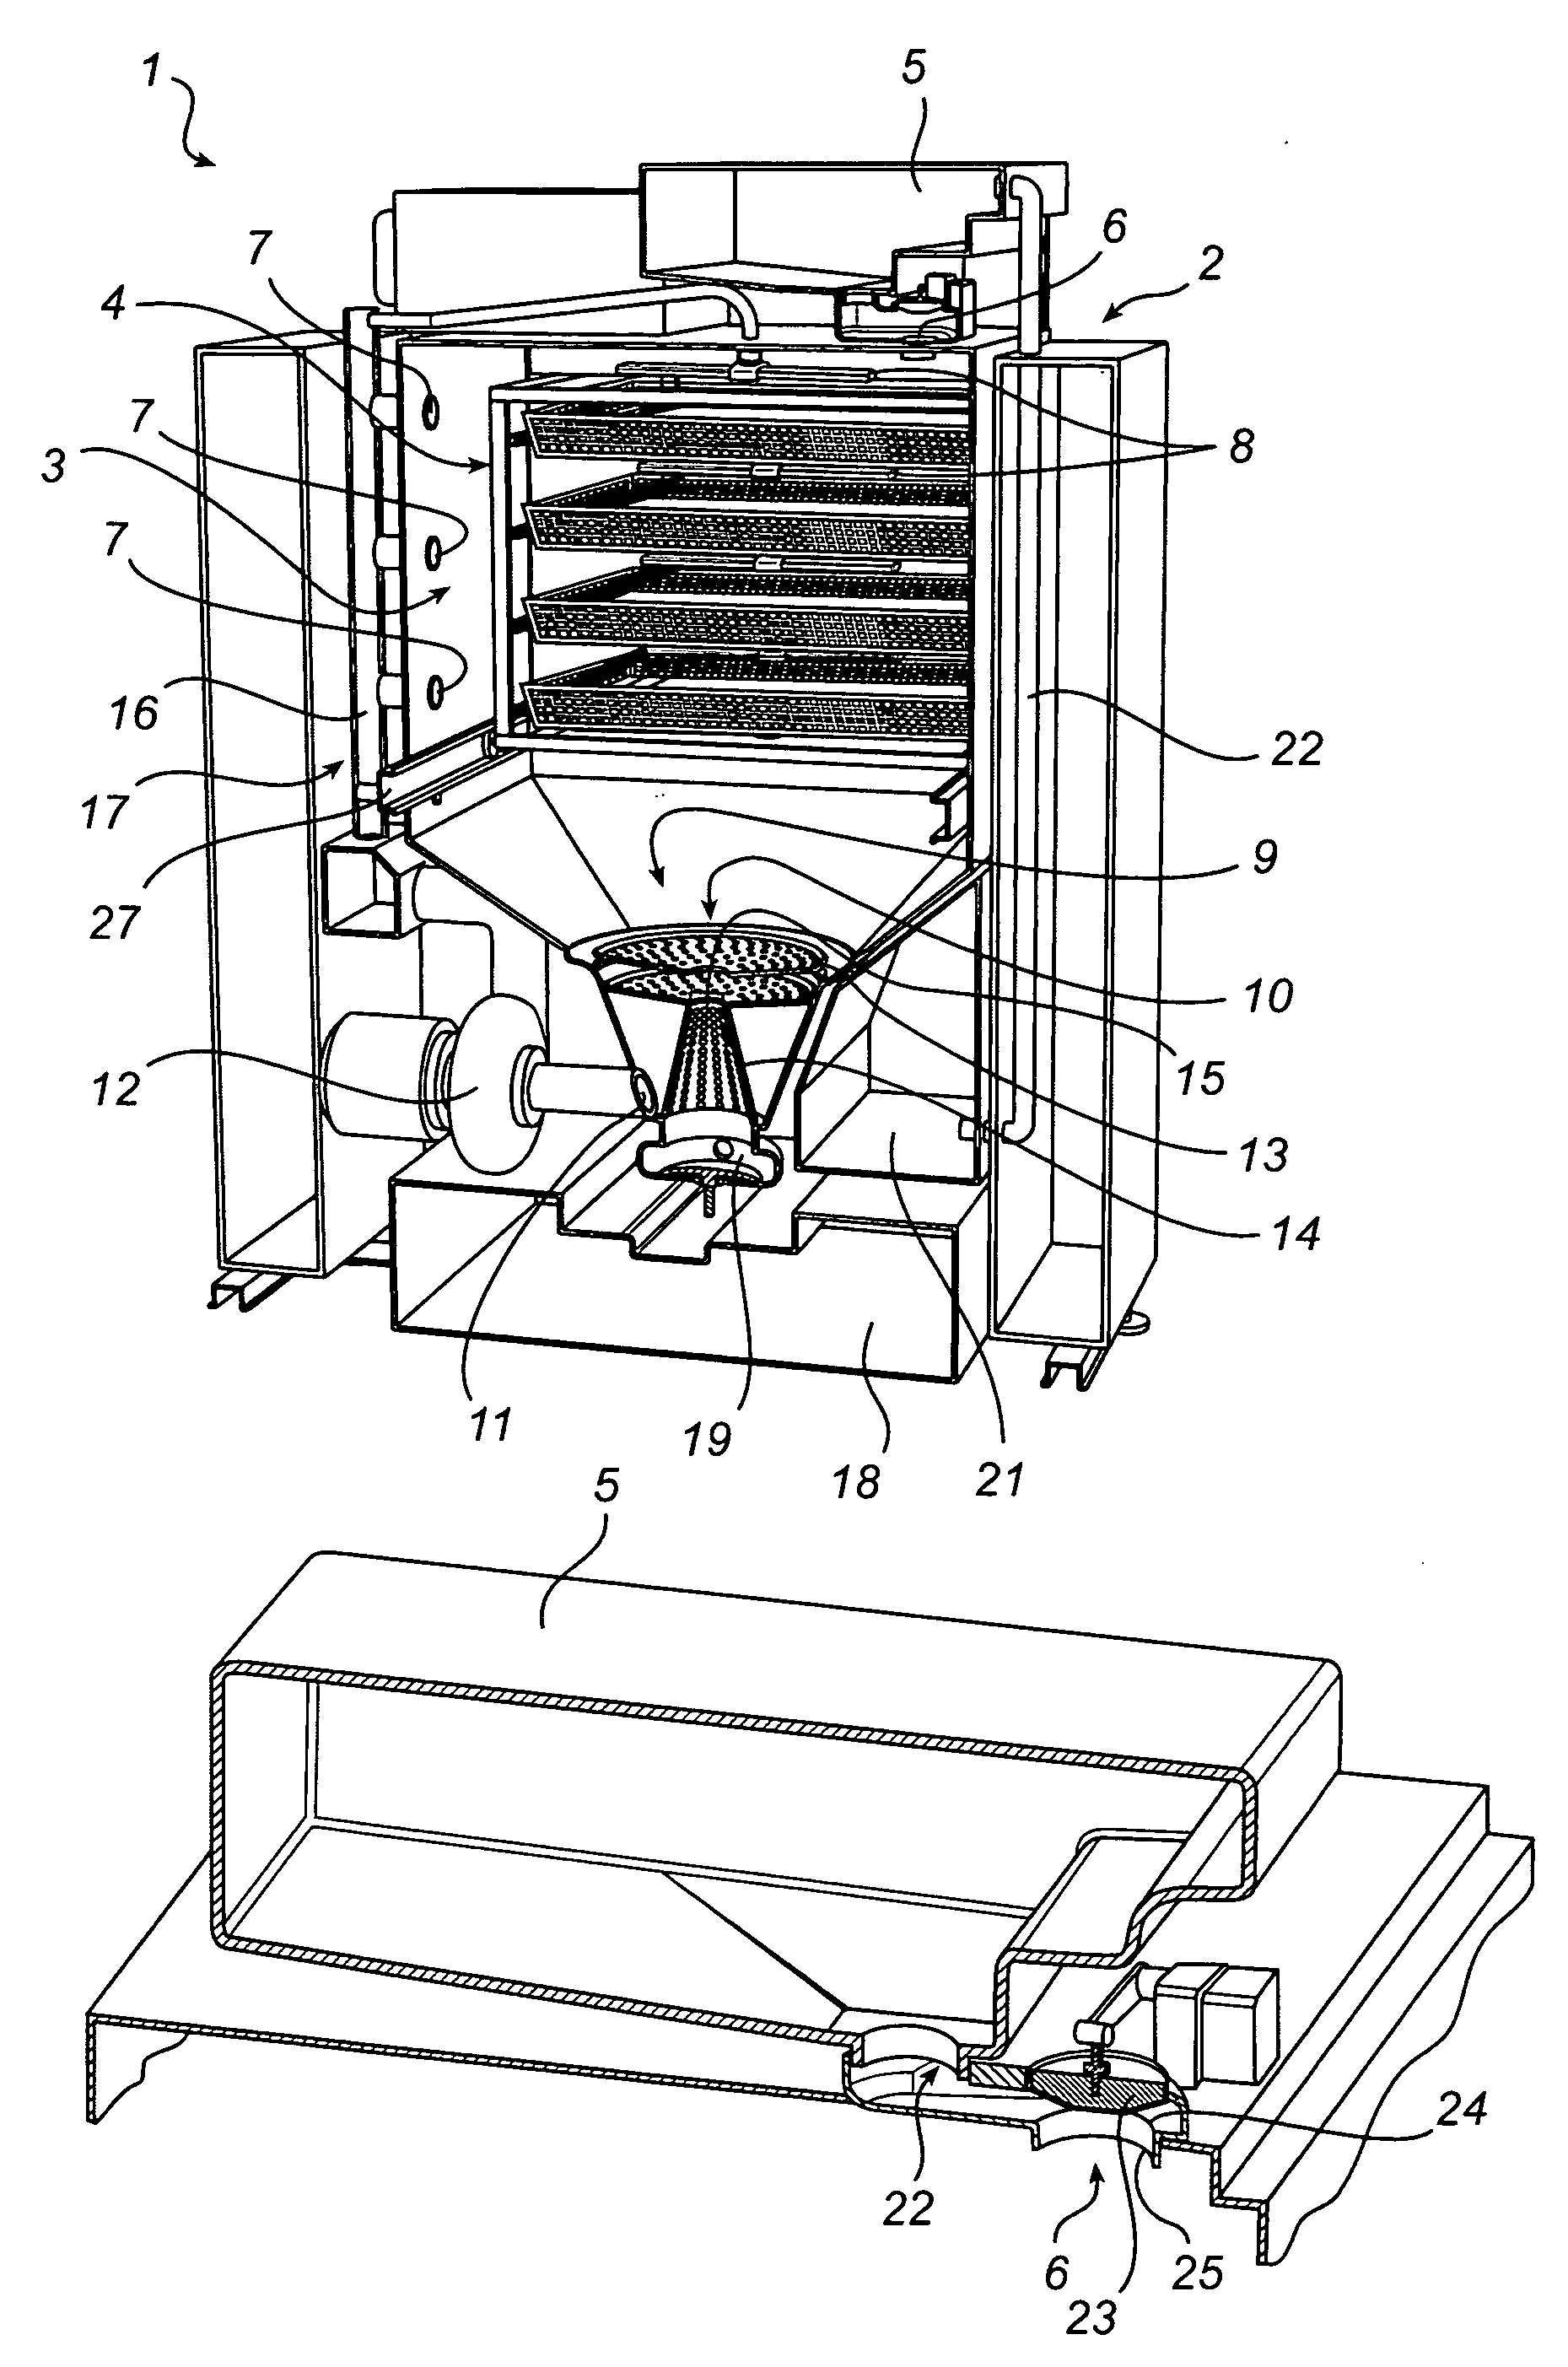 Outlet device for disinfection apparatus and method for liquid transfer